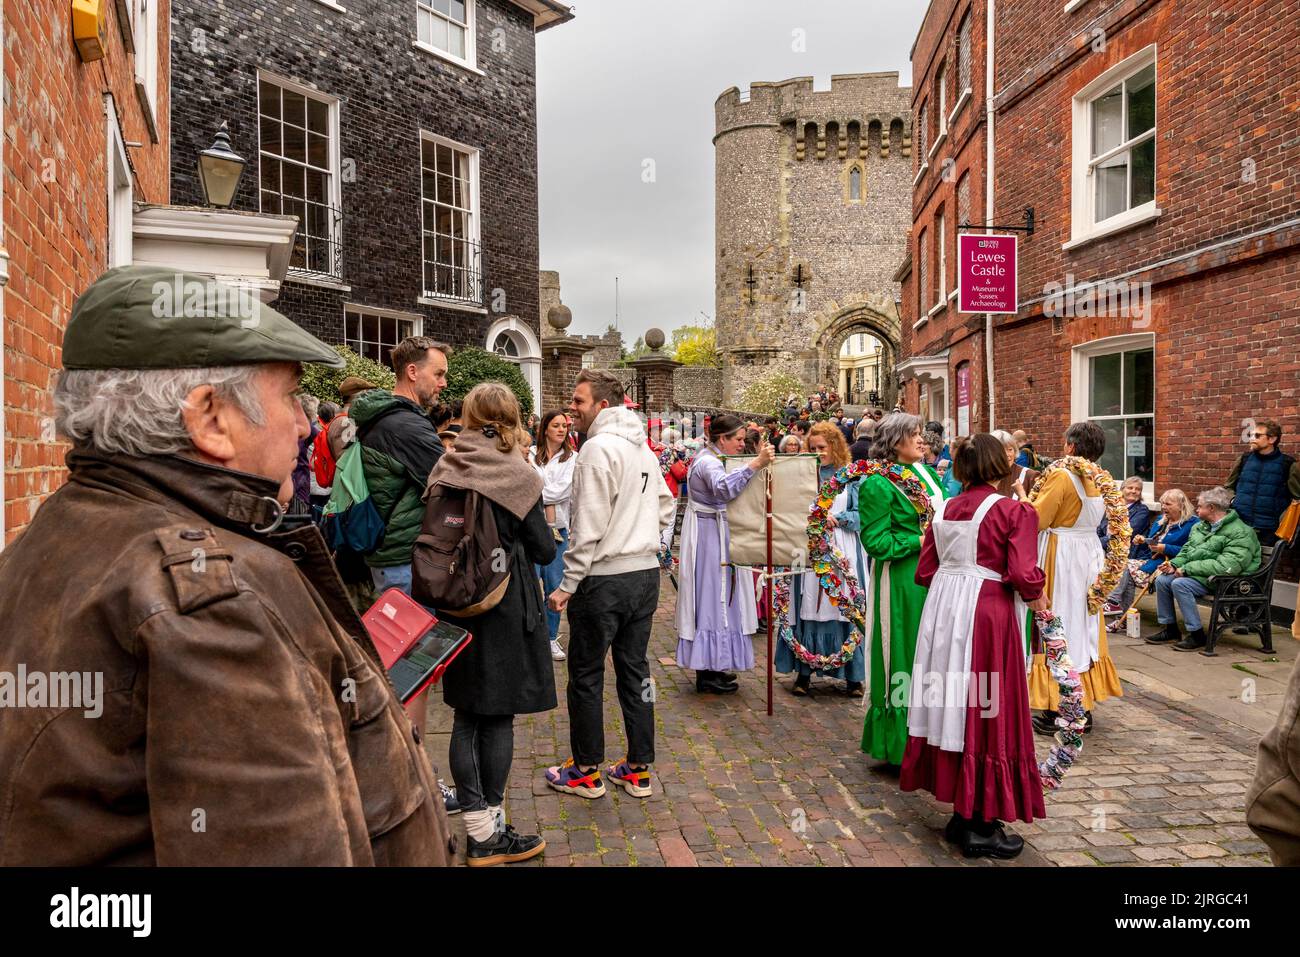 The Knots Of May Female Morris Dancers Wait Outside Lewes Castle To Take Part In The Annual Garland Day Parade, Lewes, East Sussex, UK. Stock Photo